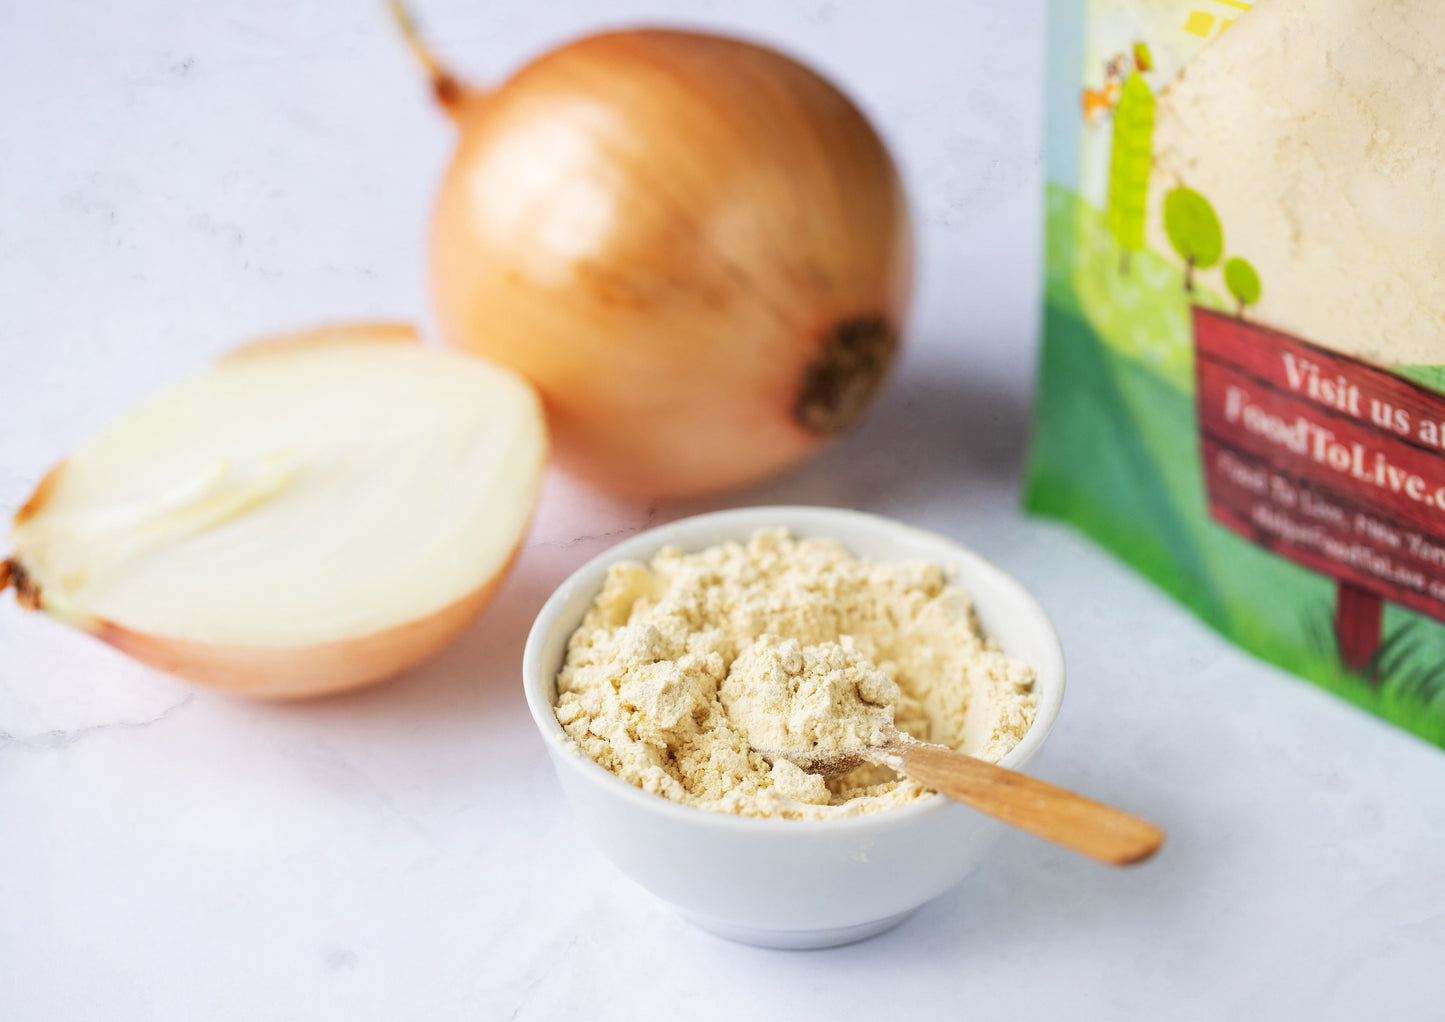 Onion Powder – Finely Ground Dried Onions, Pure, Vegan, Bulk. Rich Onion Flavor. High in Vitamin C, Dietary Fiber. Great Seasoning for Cooking, and Baking. Perfect for Spice Blends